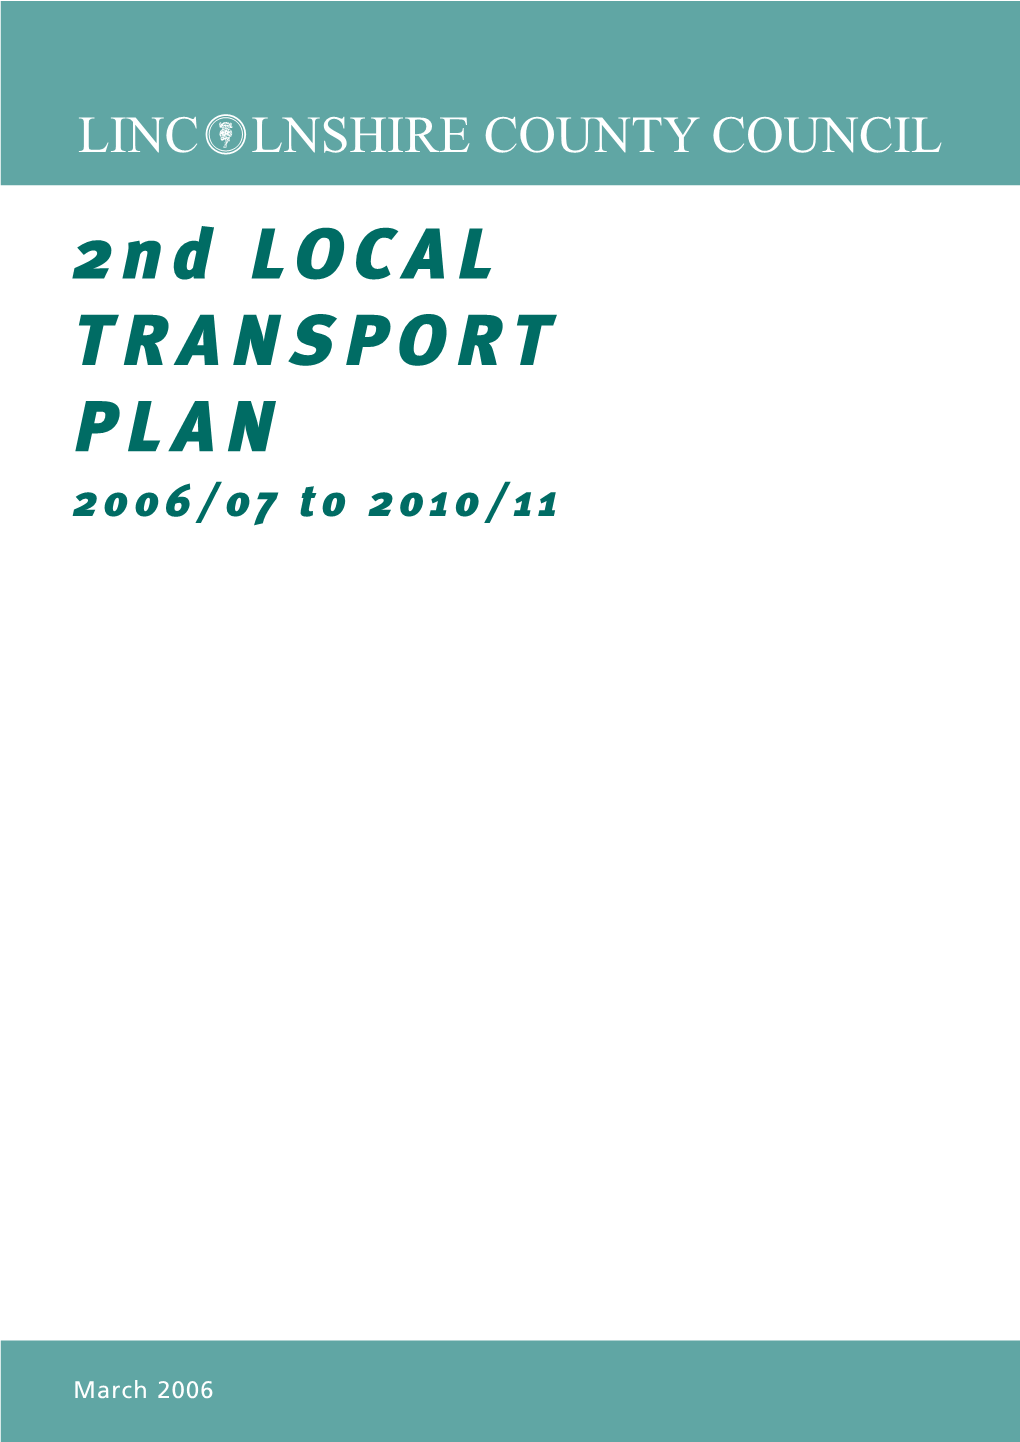 2Nd LOCAL TRANSPORT PLAN 2006/07 to 2010/11